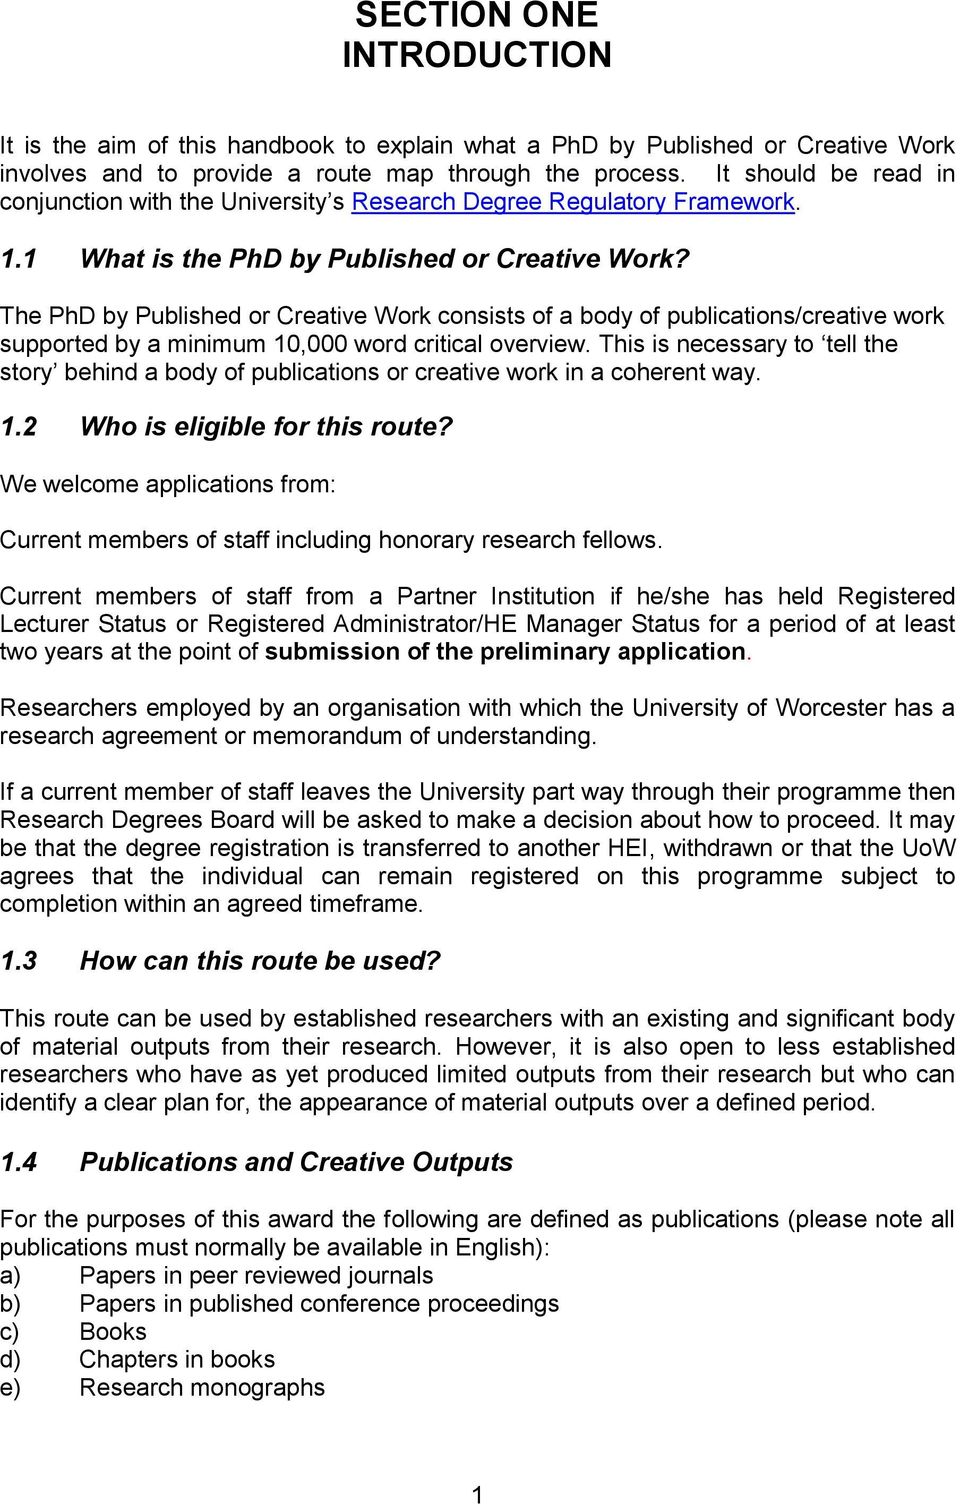 The PhD by Published or Creative Work consists of a body of publications/creative work supported by a minimum 10,000 word critical overview.